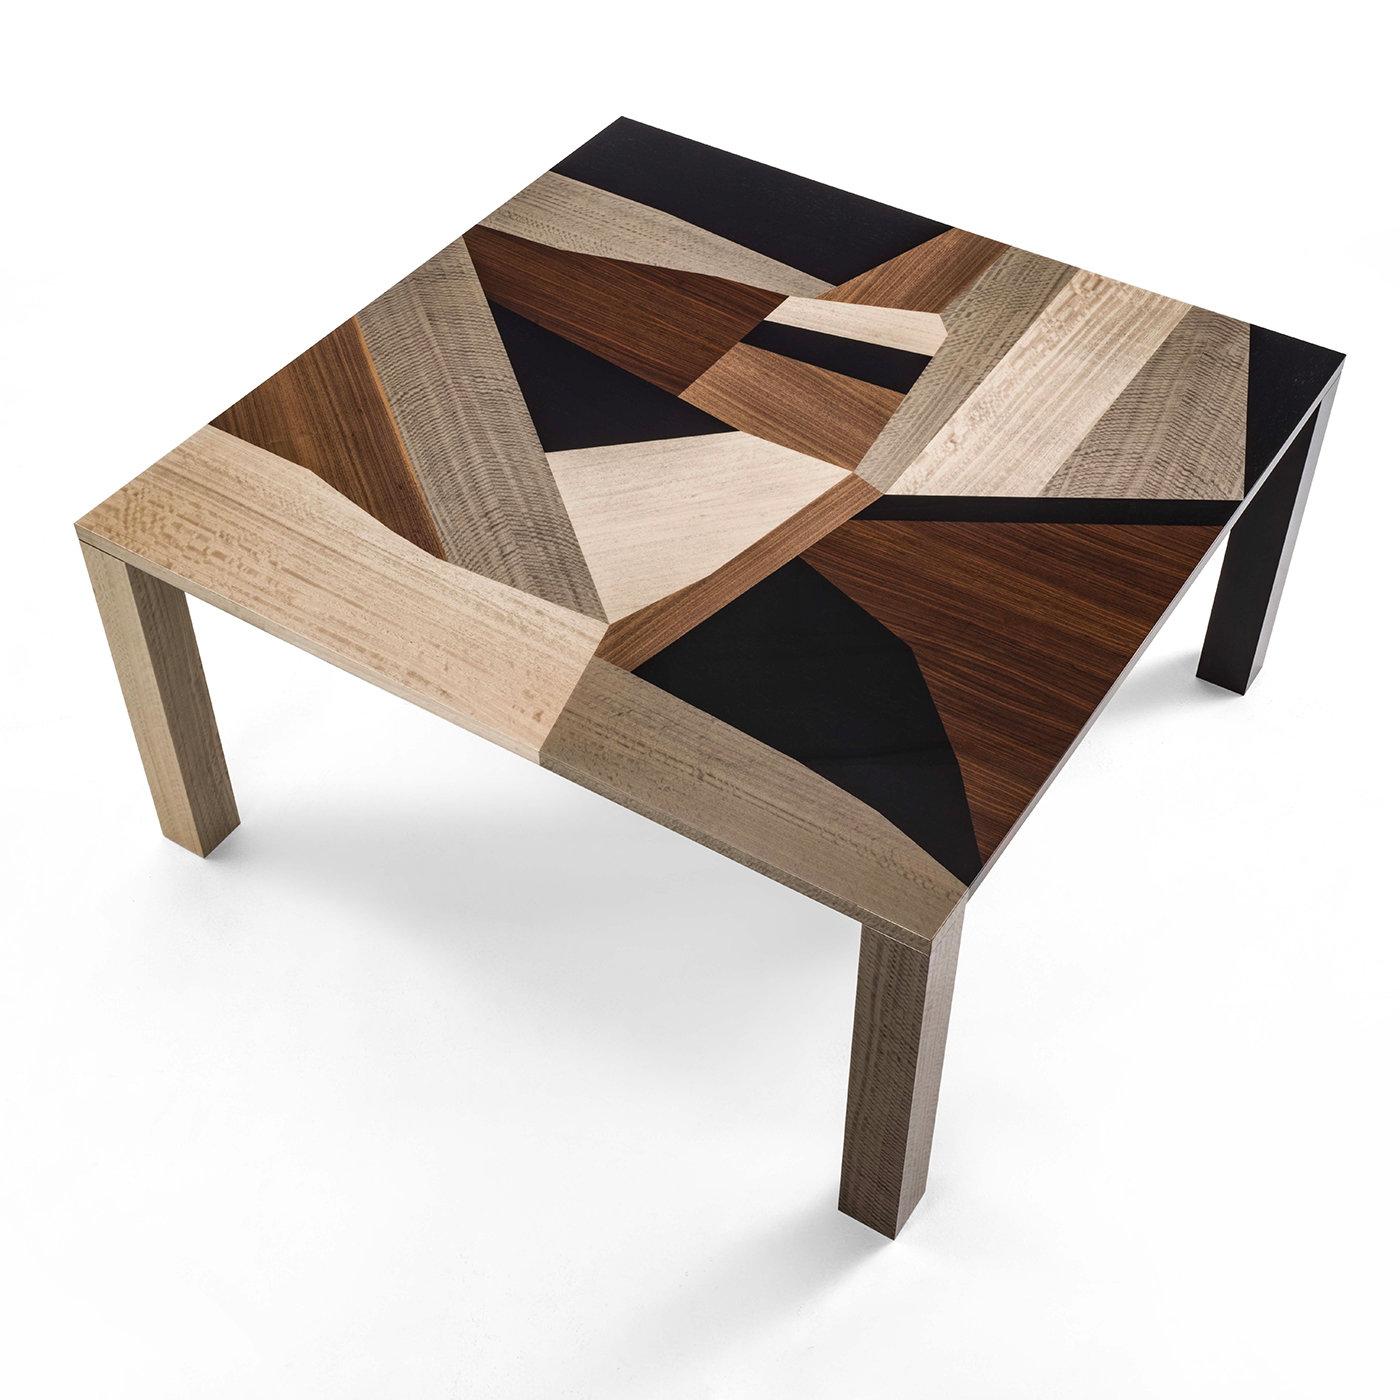 The dry table has been crafted using various types of wood inlays appearing on the top, edge and legs. An abstract geometric pattern of varying wood tones within a simple shape, in which nature and craftsmanship form the perfect union. With its